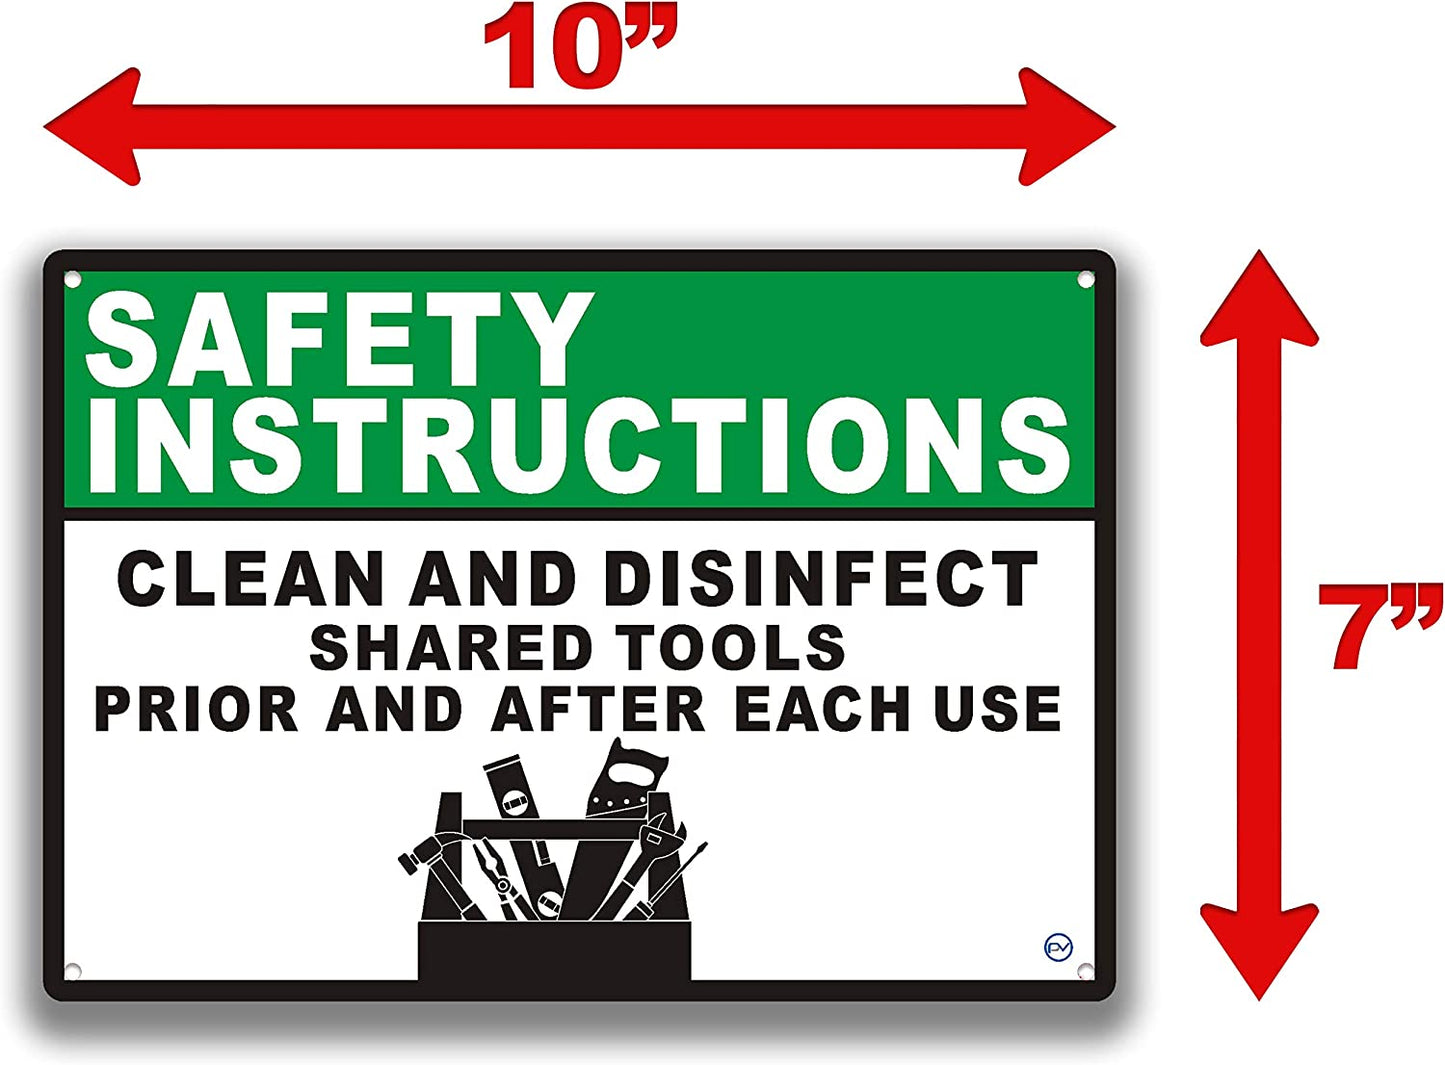 Construction Signage - High Quality Plastic (CLEAN TOOLS)